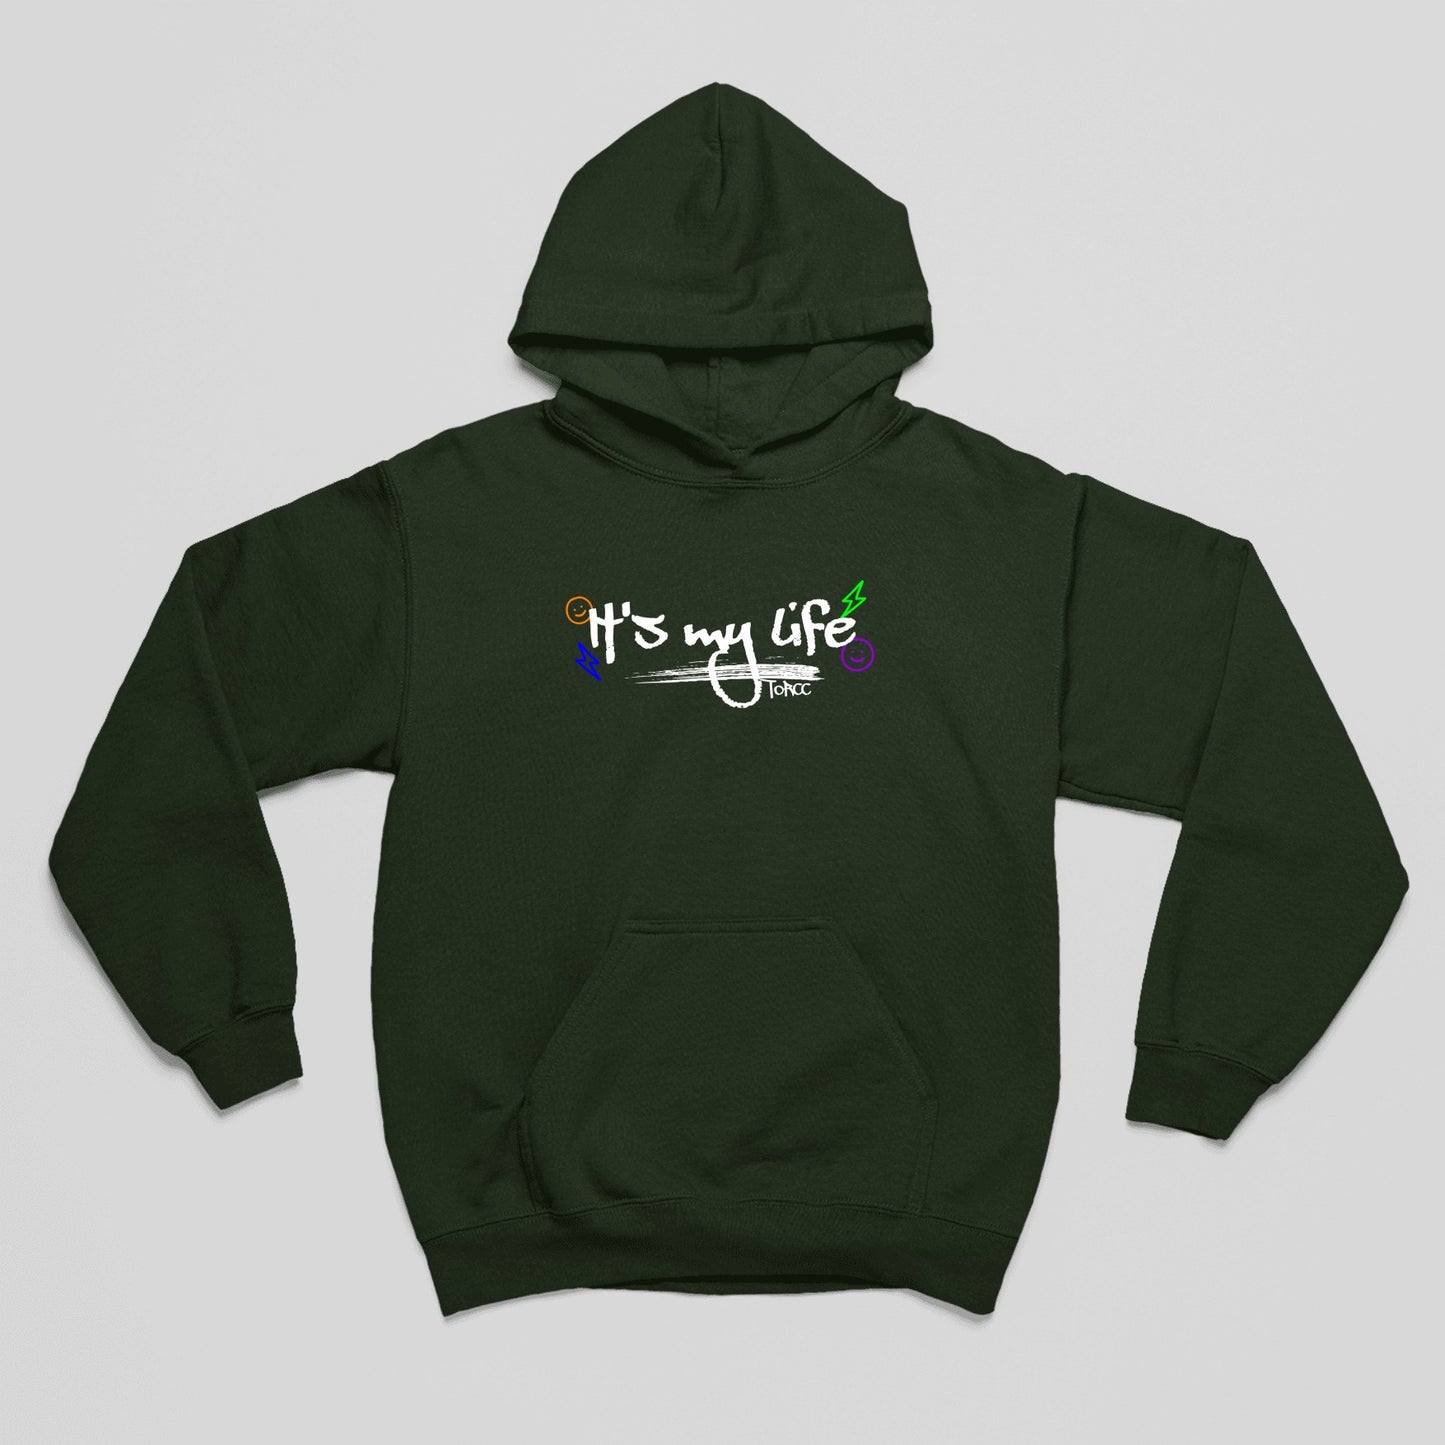 Forest Green My Life: Graphic Hoodie For Men and Womenoversized tshirt for men, oversized tshirt for women, graphic oversized tshirt, streetwear oversized tshirt, oversized tshirt, oversized tee, hoodies for men, hoodies for women, hoodies on sale, hoodies on sale india, hoodies men